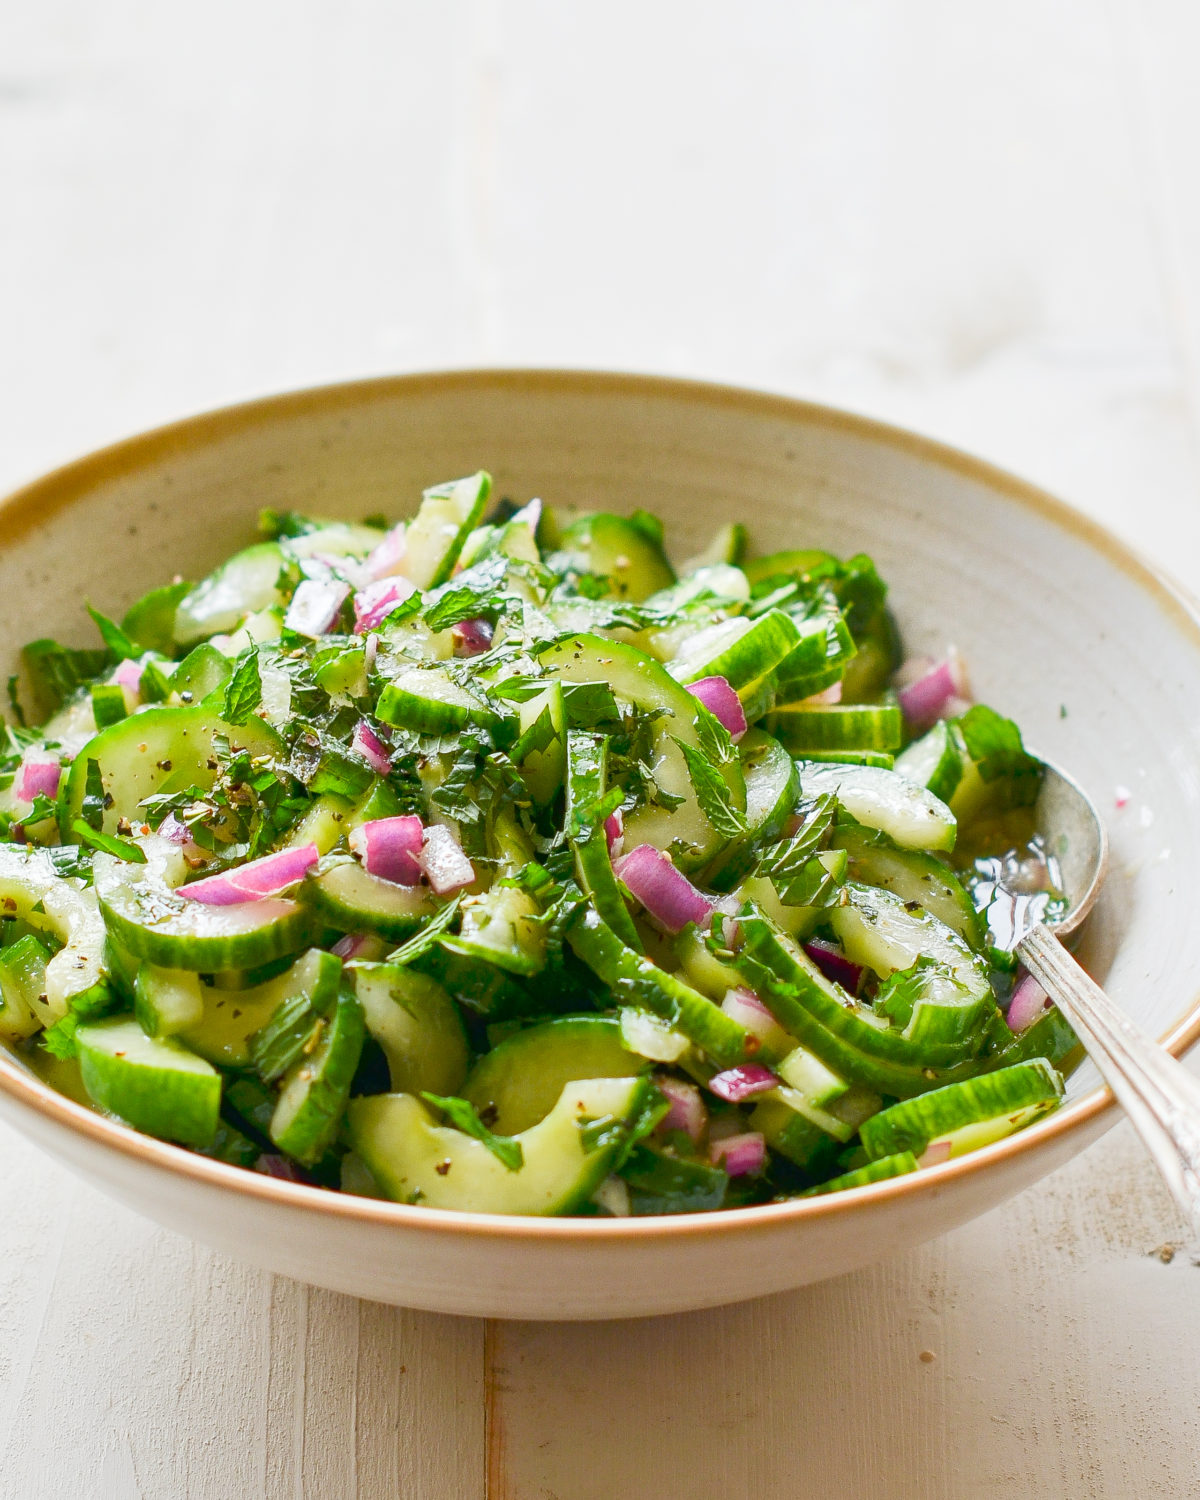 Spoon in a bowl of cucumber salad with mint.